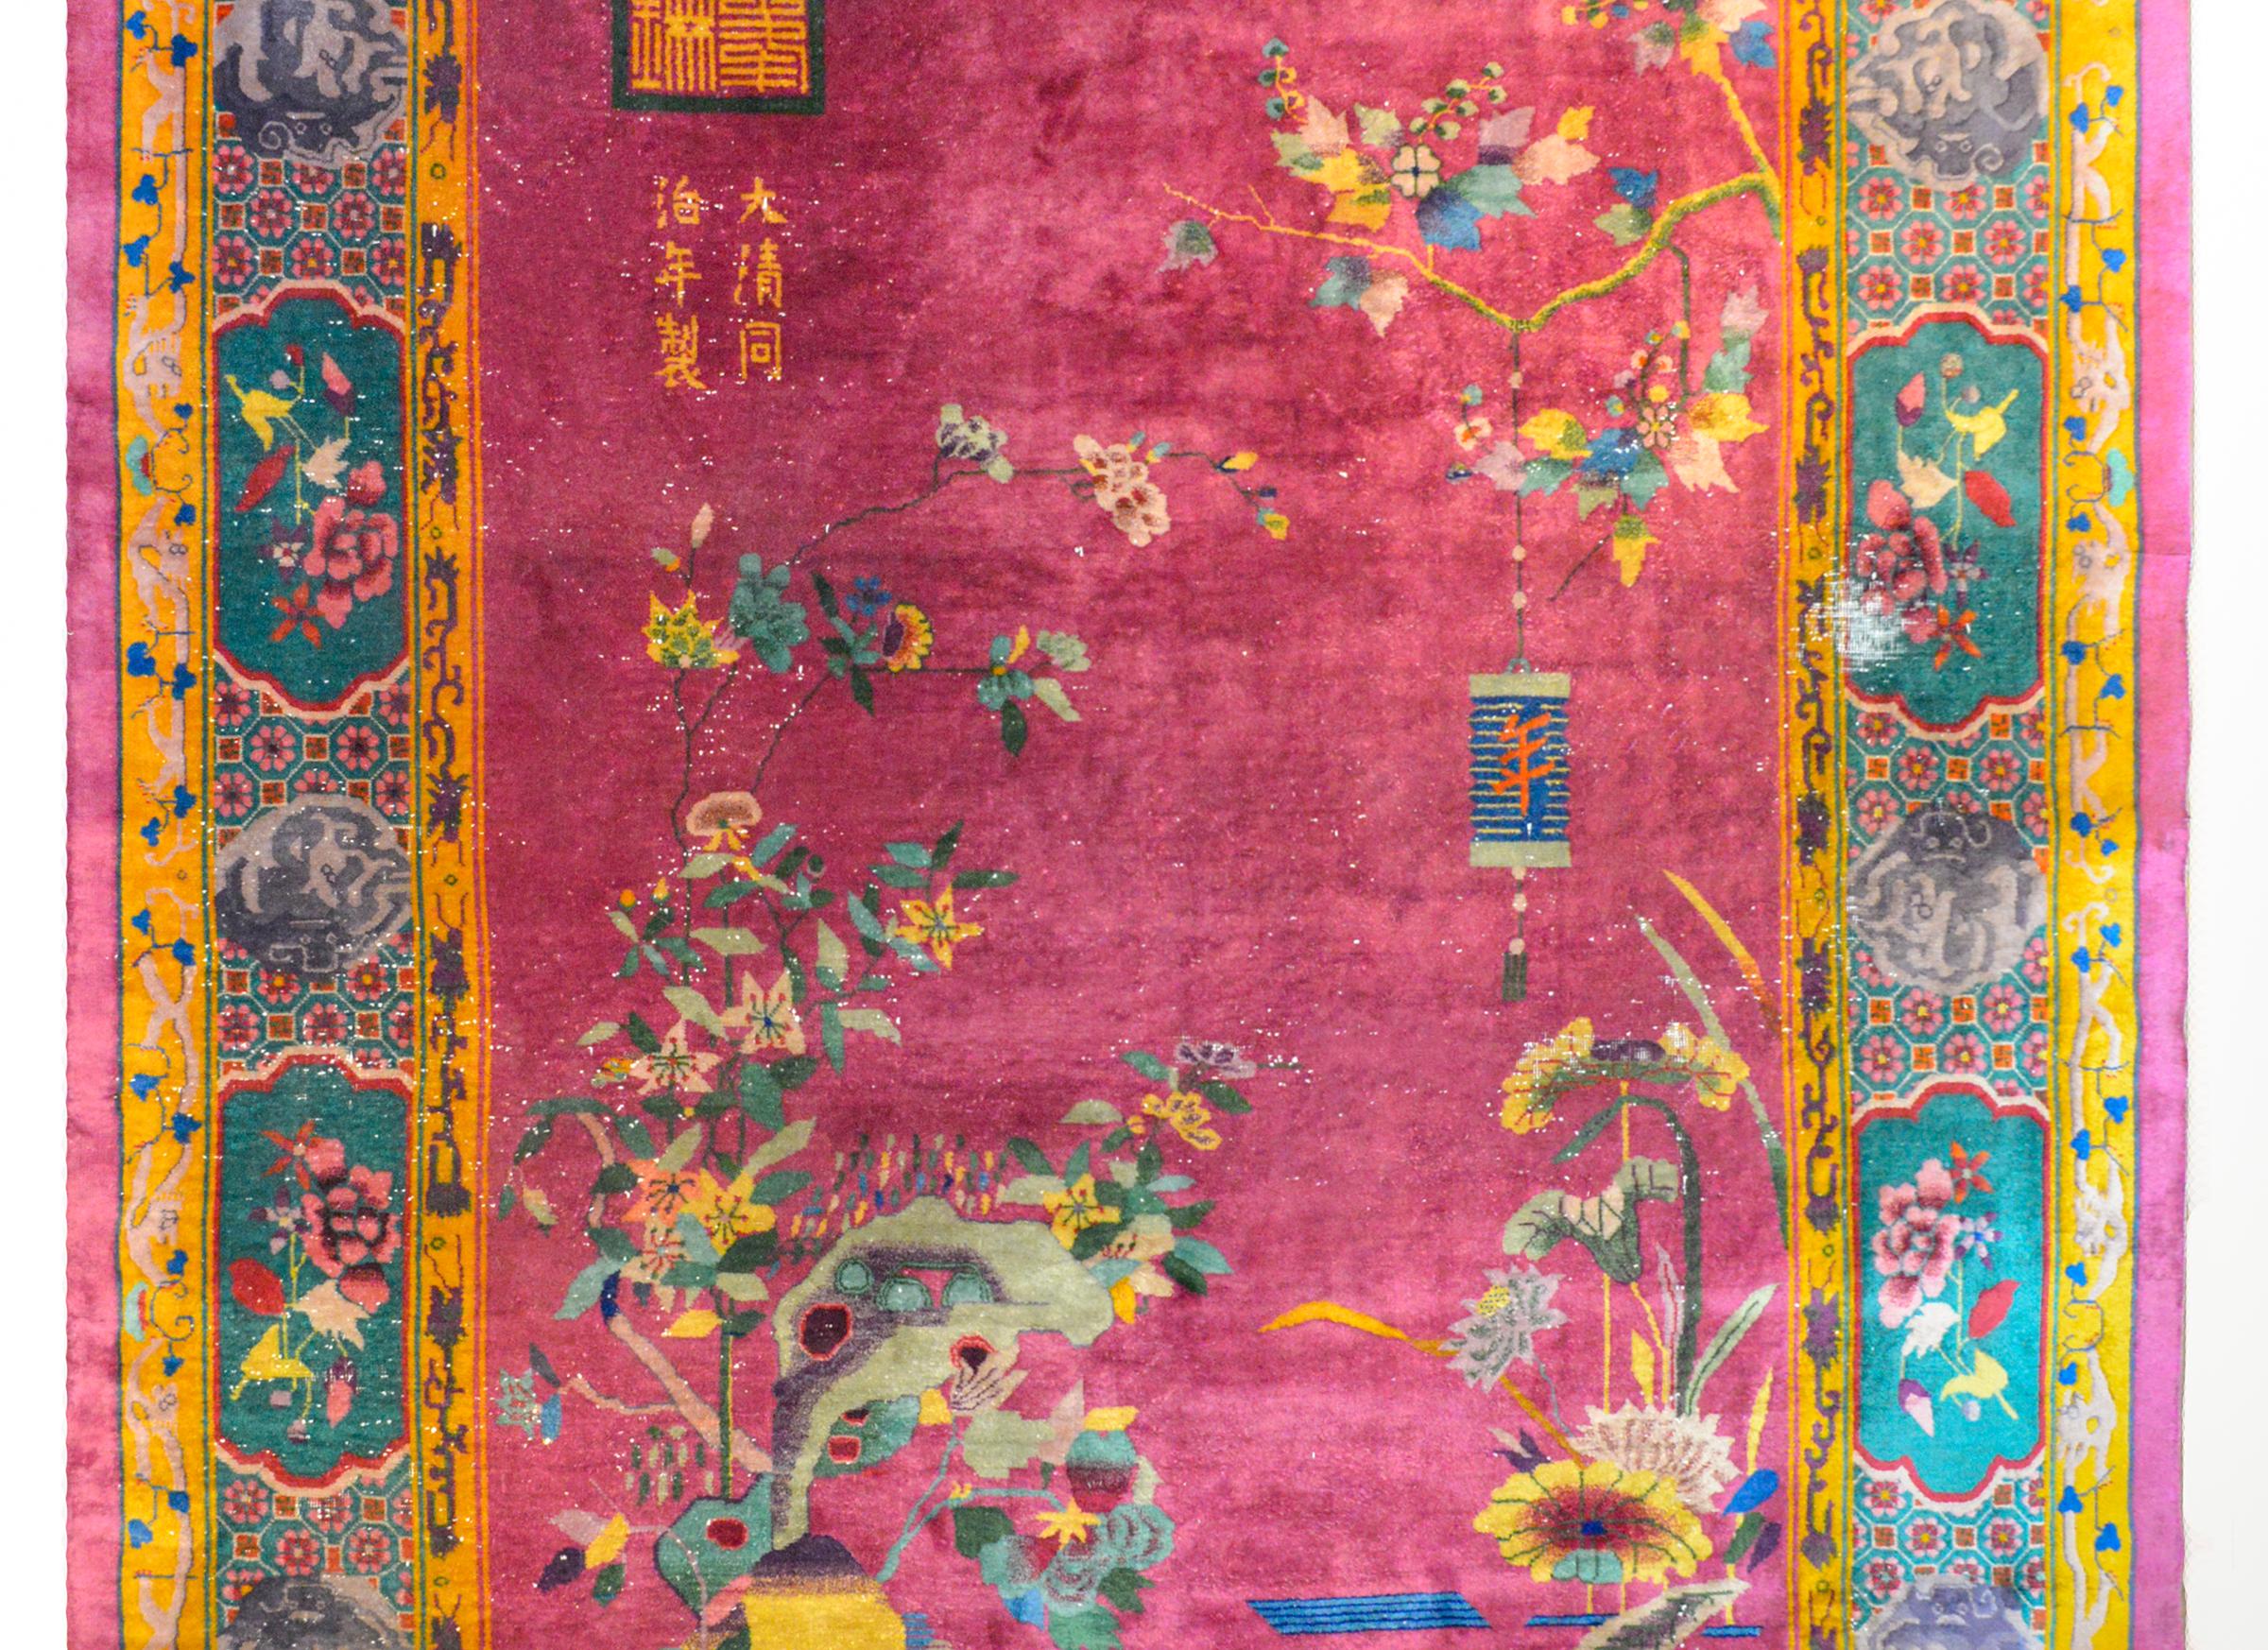 An unusual early 20th century Chinese Art Deco rug with a fuchsia ground surrounded by an unusually patterned border containing several floral cartouches alternating with puffs of billowing clouds with dragons swirling within. Over the field lives a